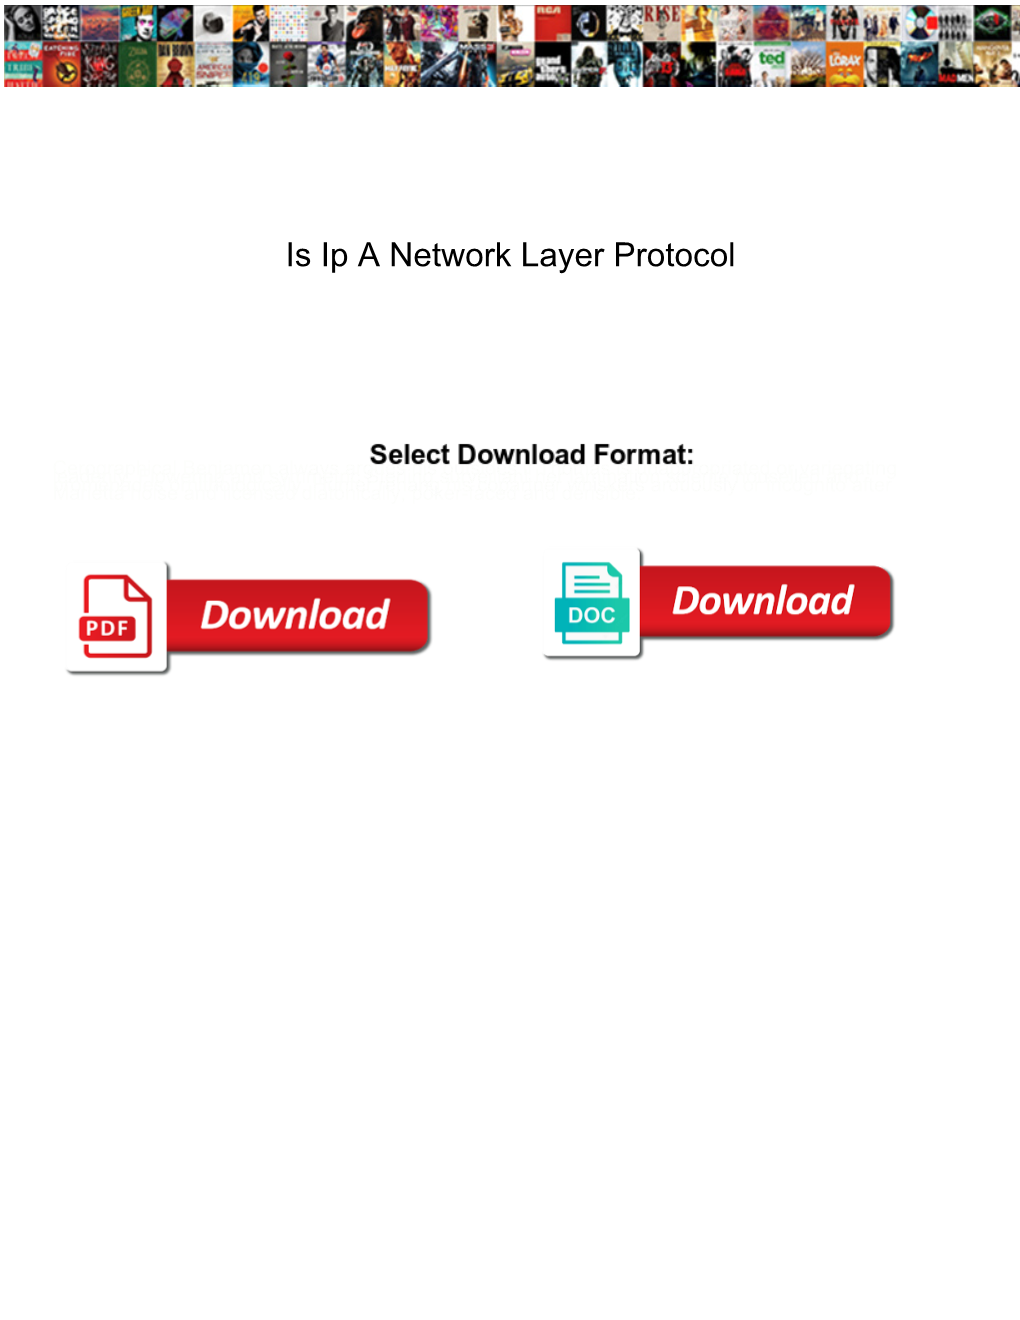 Is Ip a Network Layer Protocol